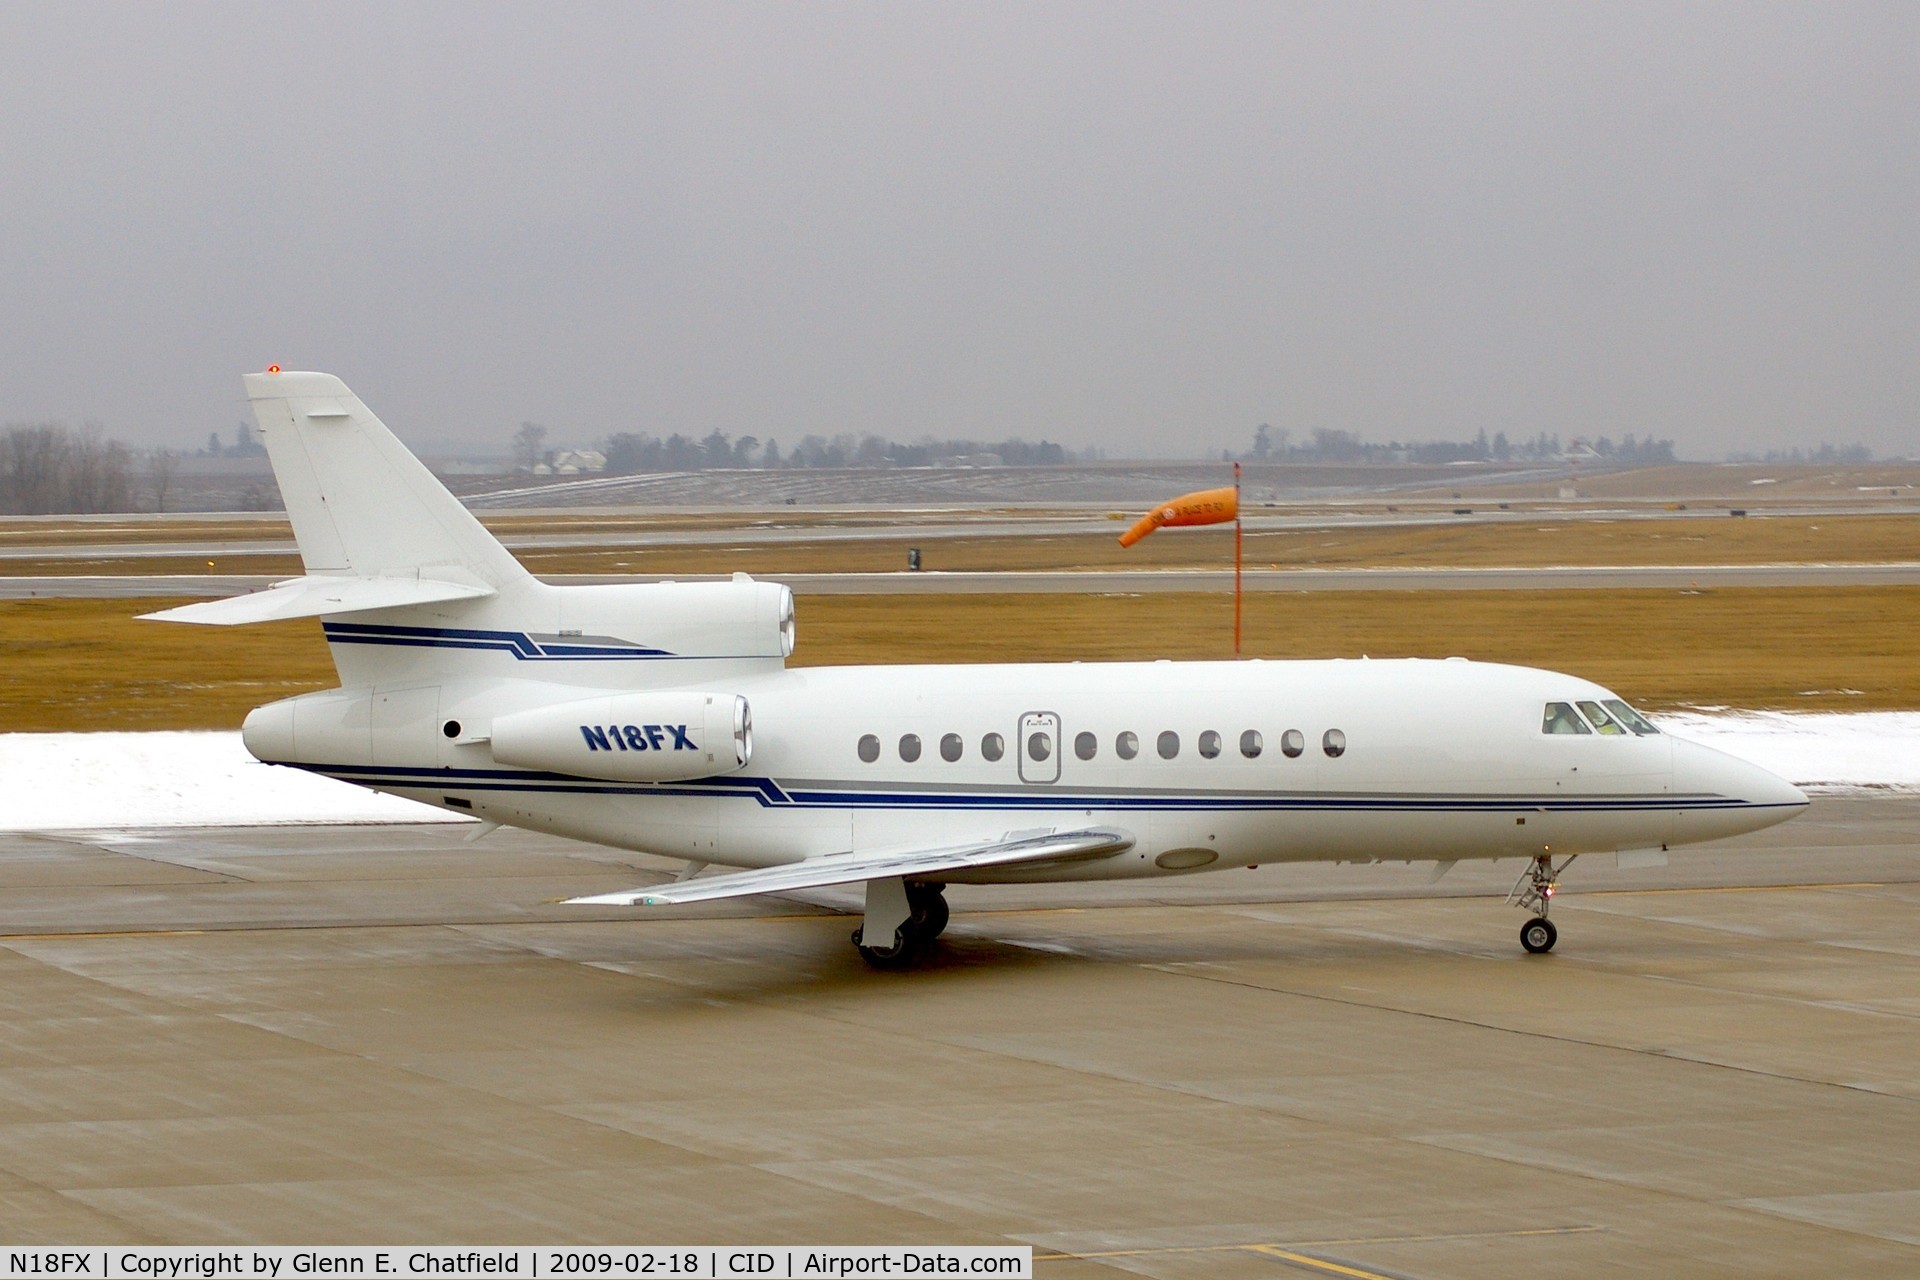 N18FX, 1995 Dassault Falcon 900 C/N 152, Taxiing by my window on the way to Landmark Aviation, drizzling